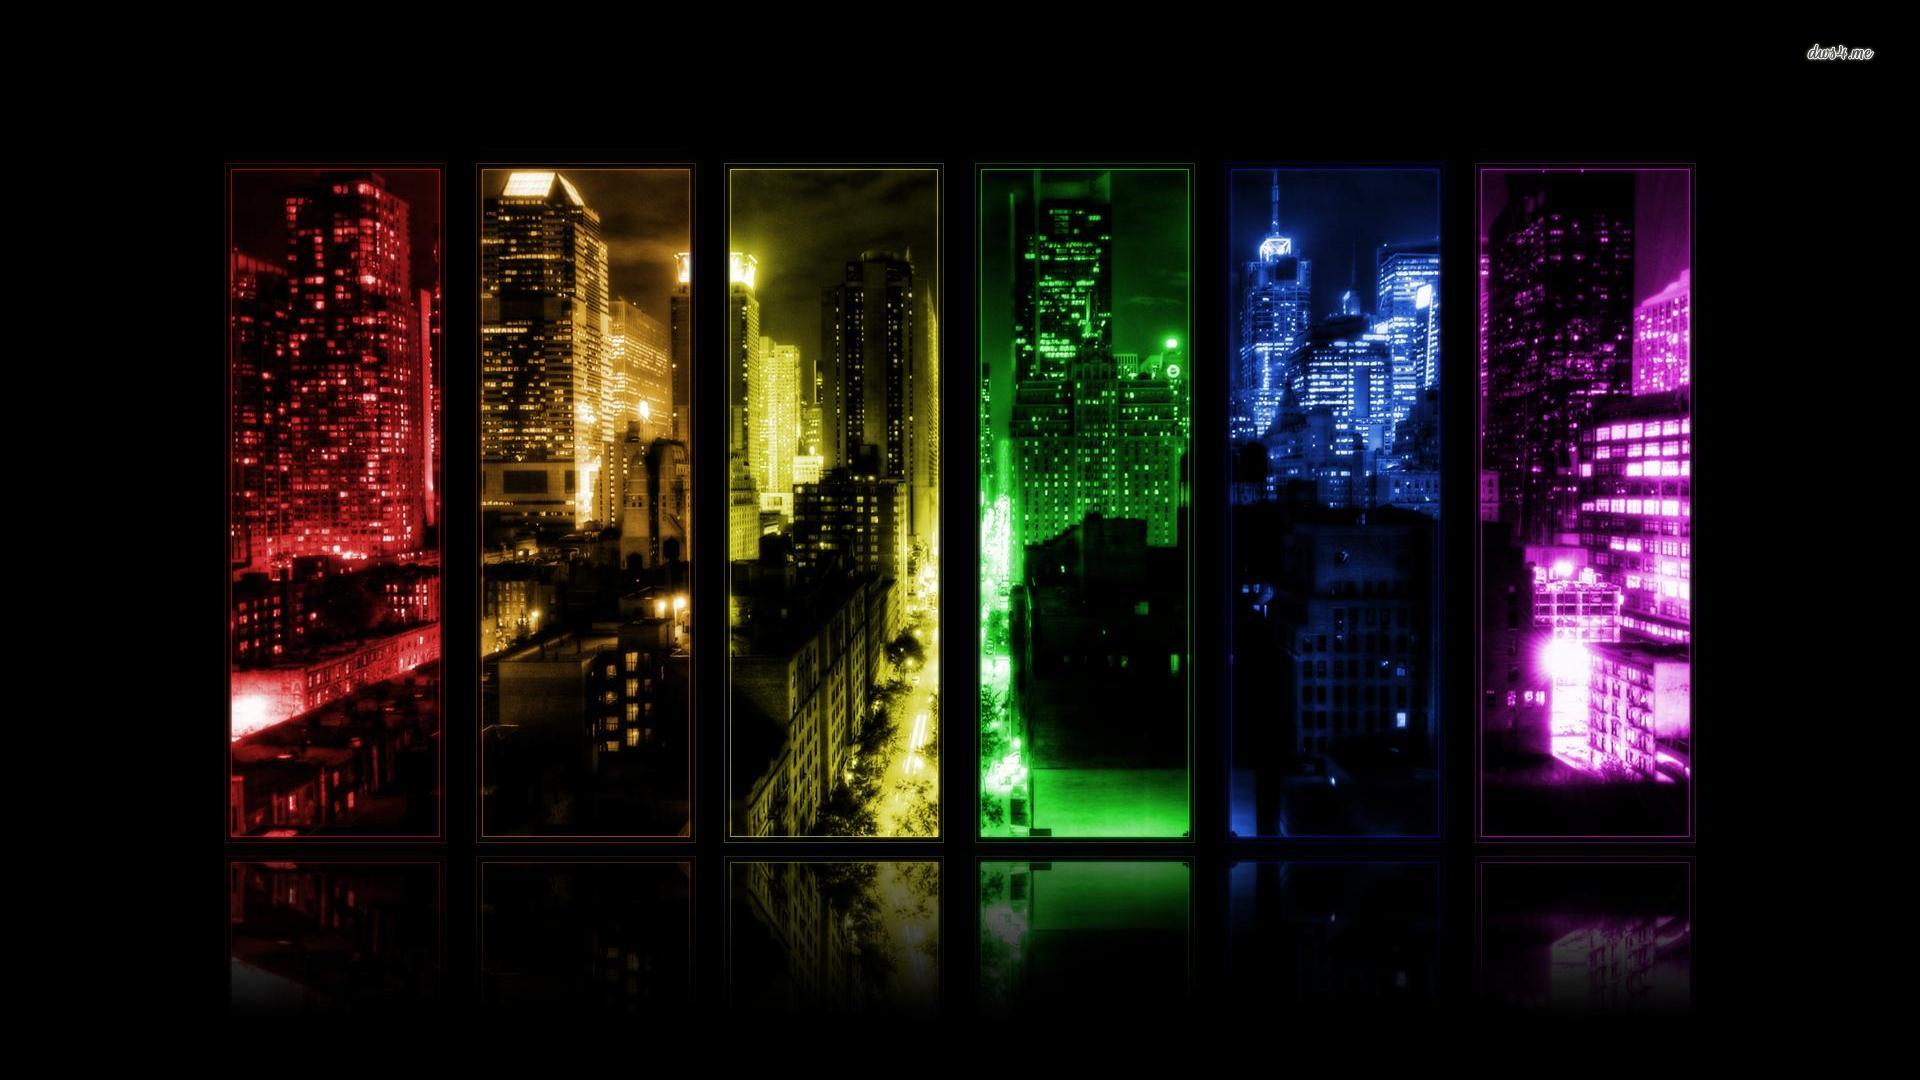 imagescicomimg201313abstract city lights hd wallpapersjpg